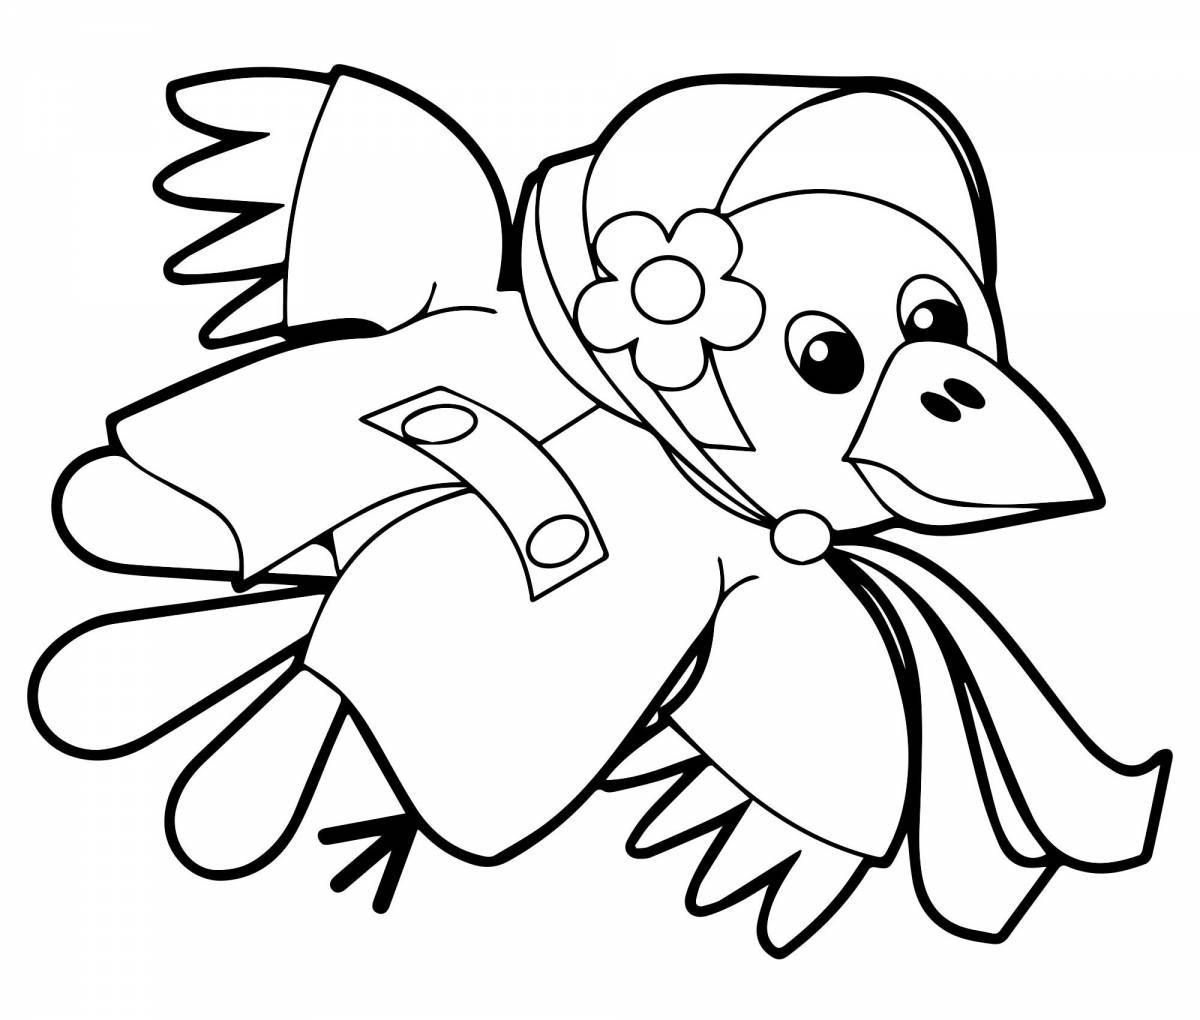 Fancy crow coloring book for kids